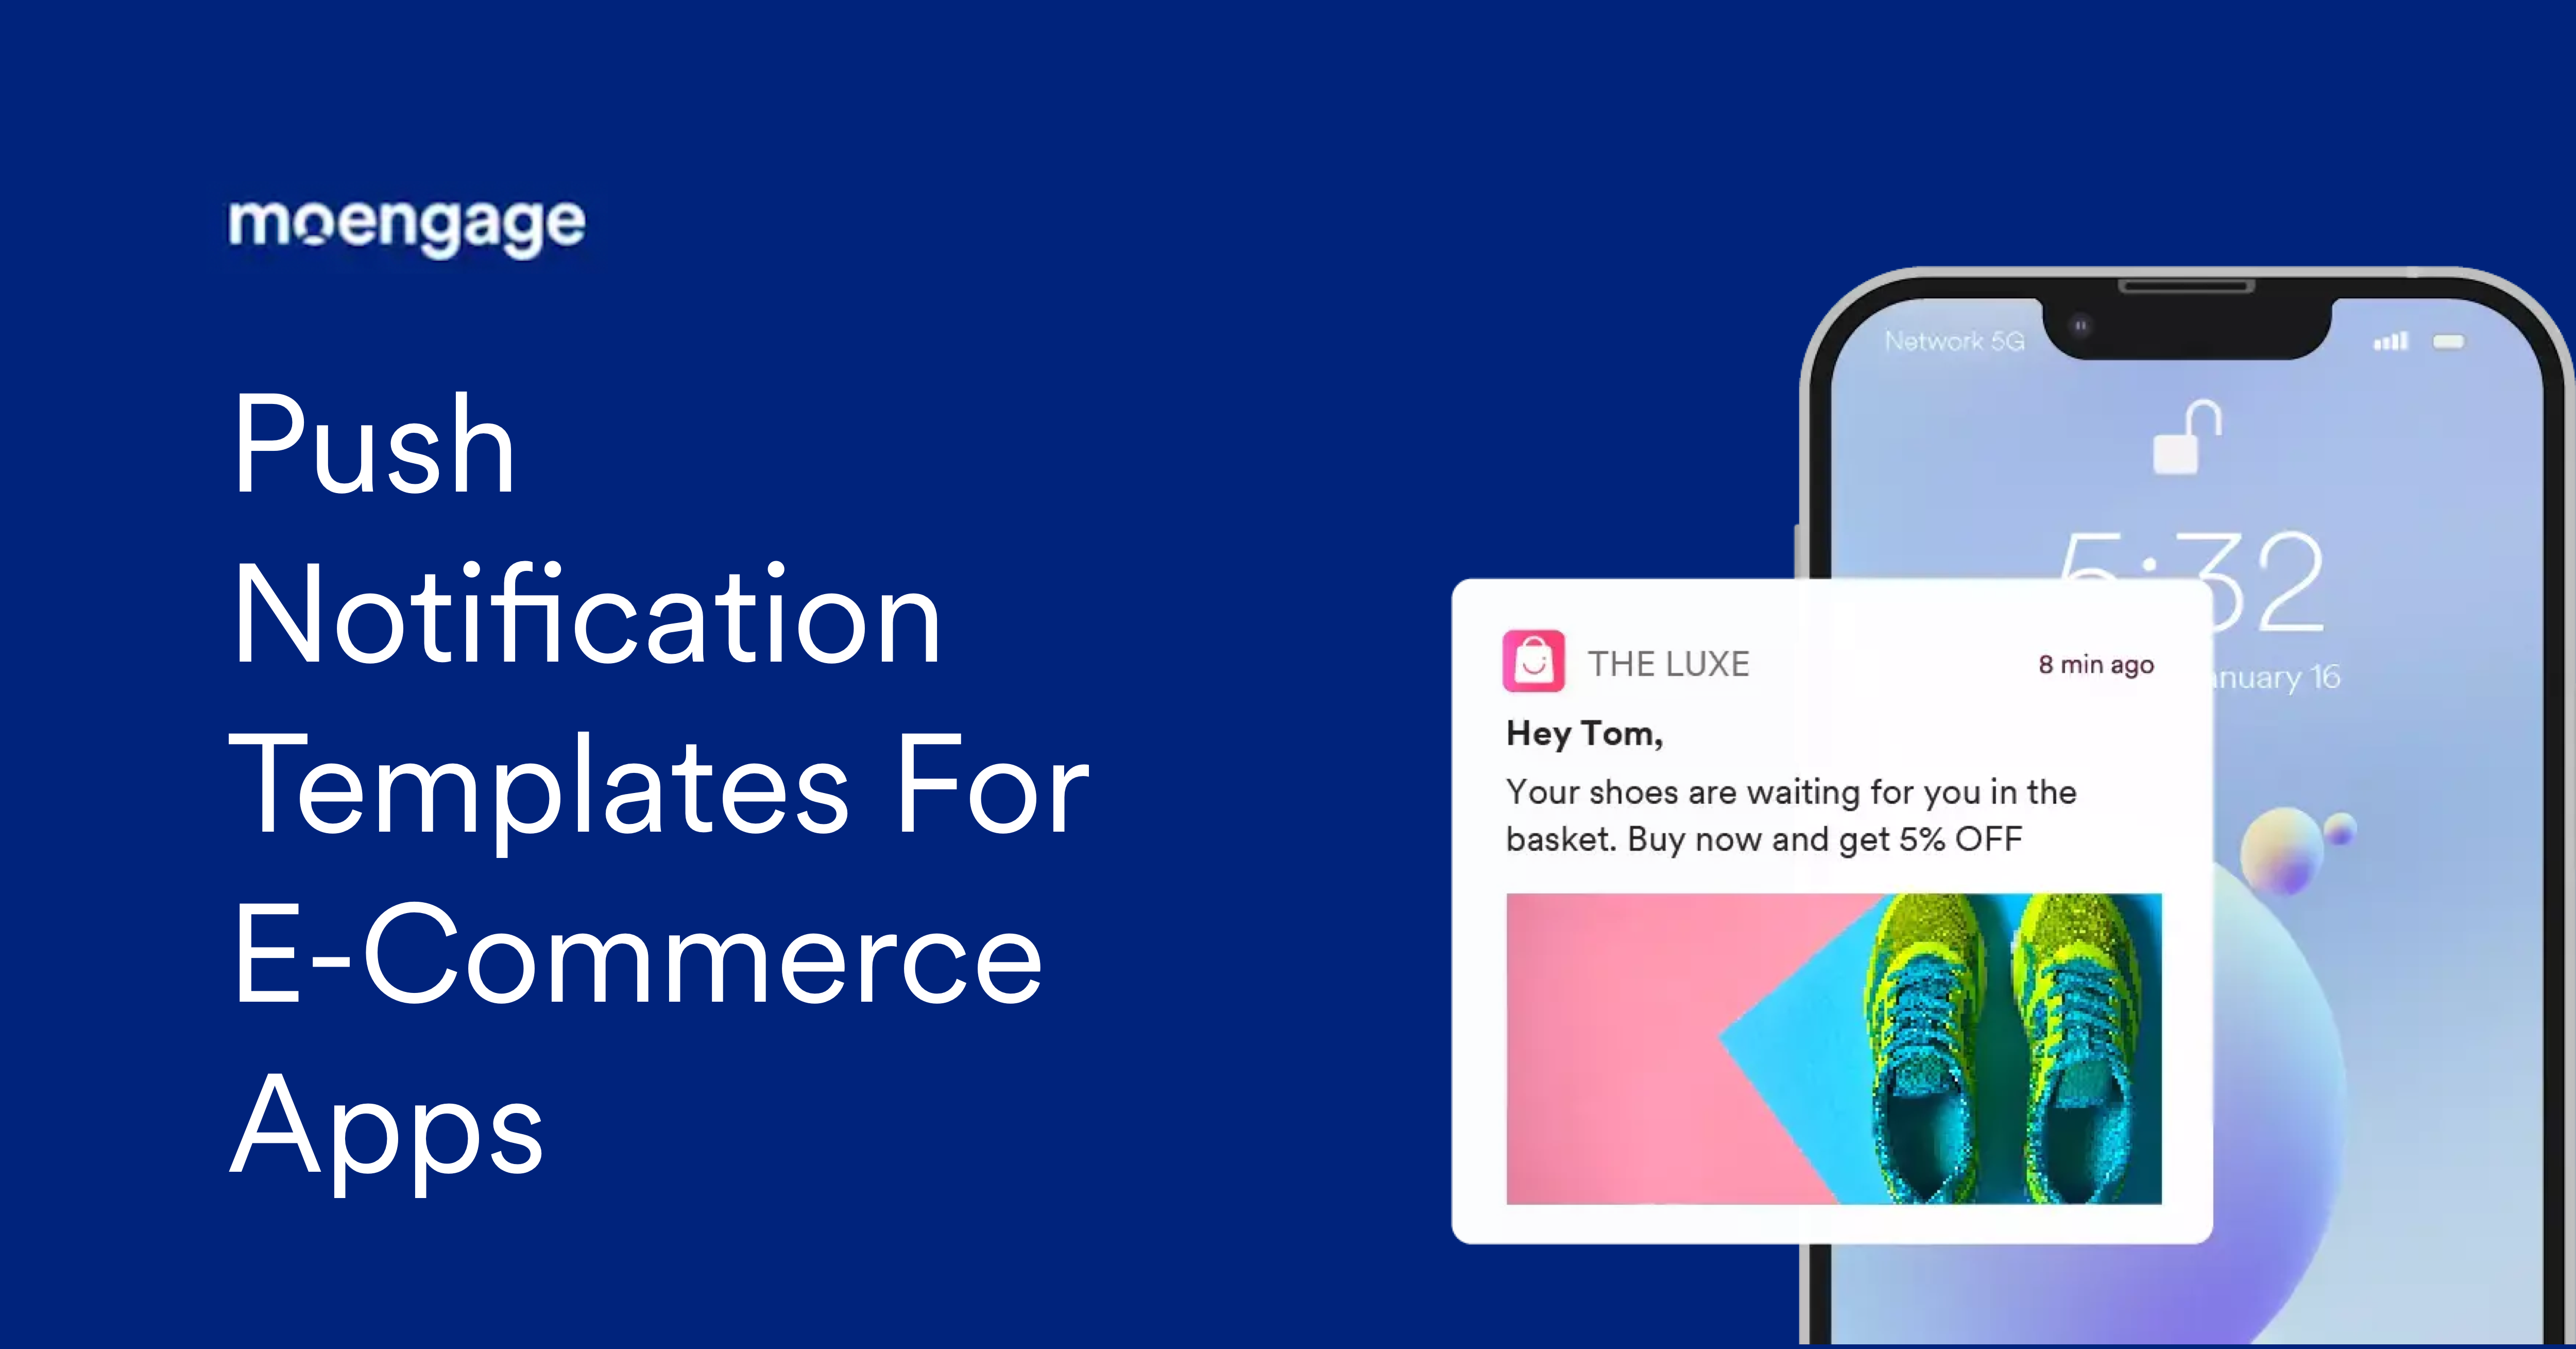 Push Notification templates for ecommerce and shopping apps